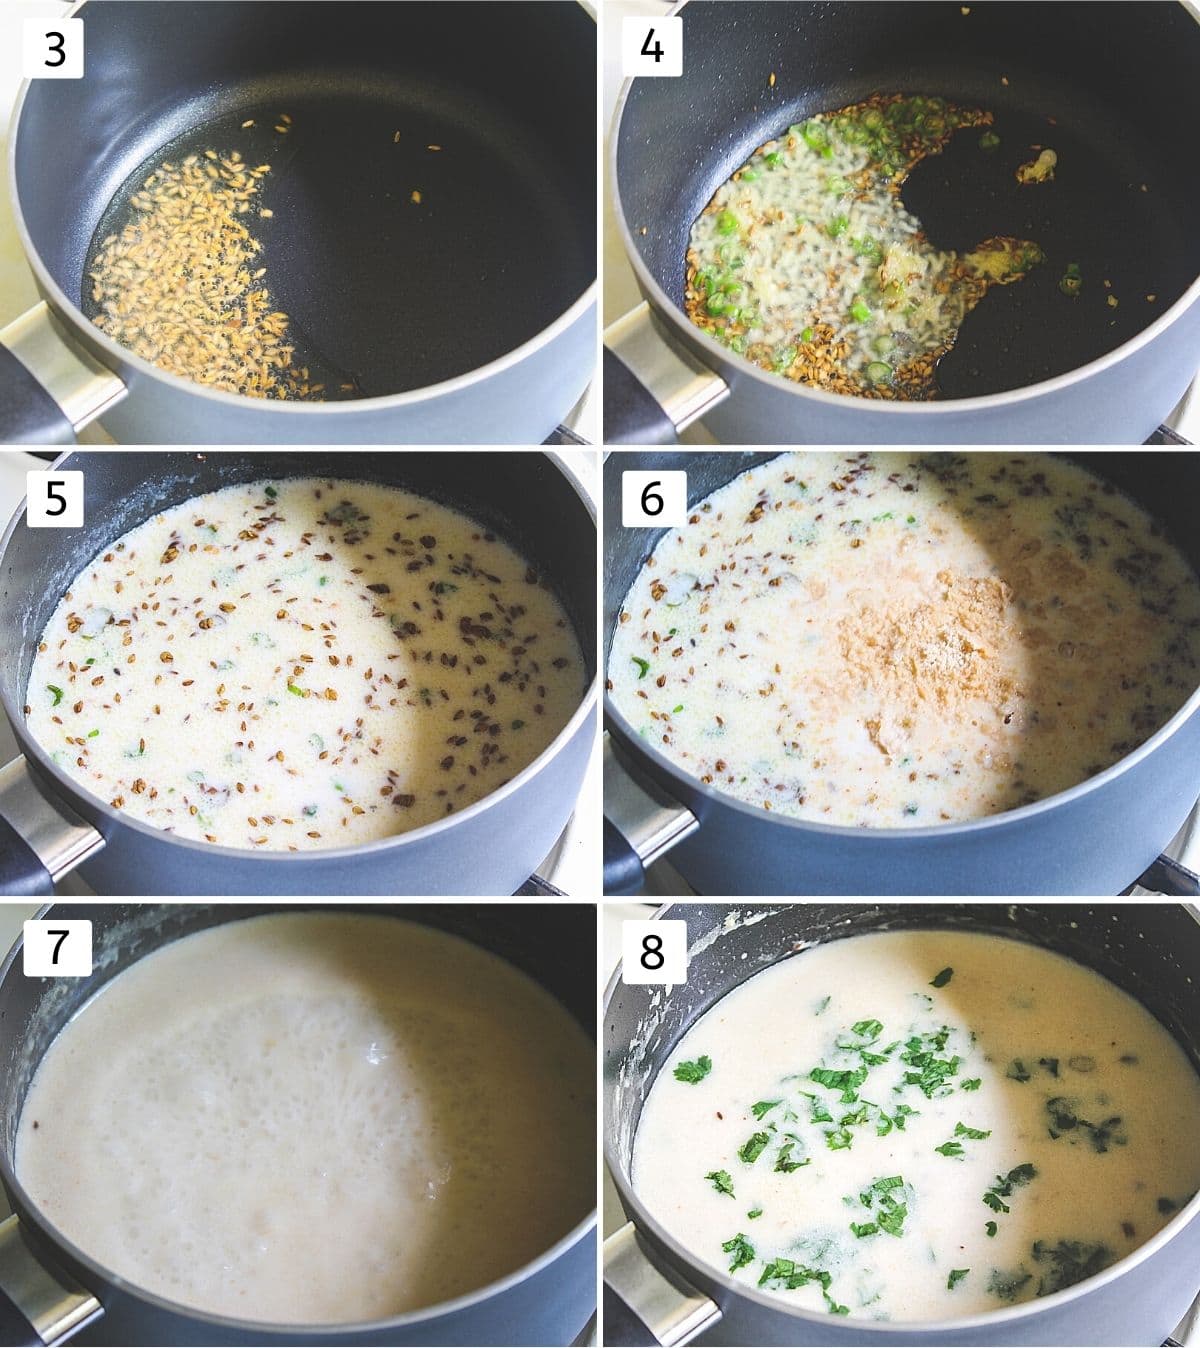 collage of 6 images showing sizzling cumin seeds, adding green chilies, add yogurt-flour mixture, adding peanuts, simmering, garnished with cilantro